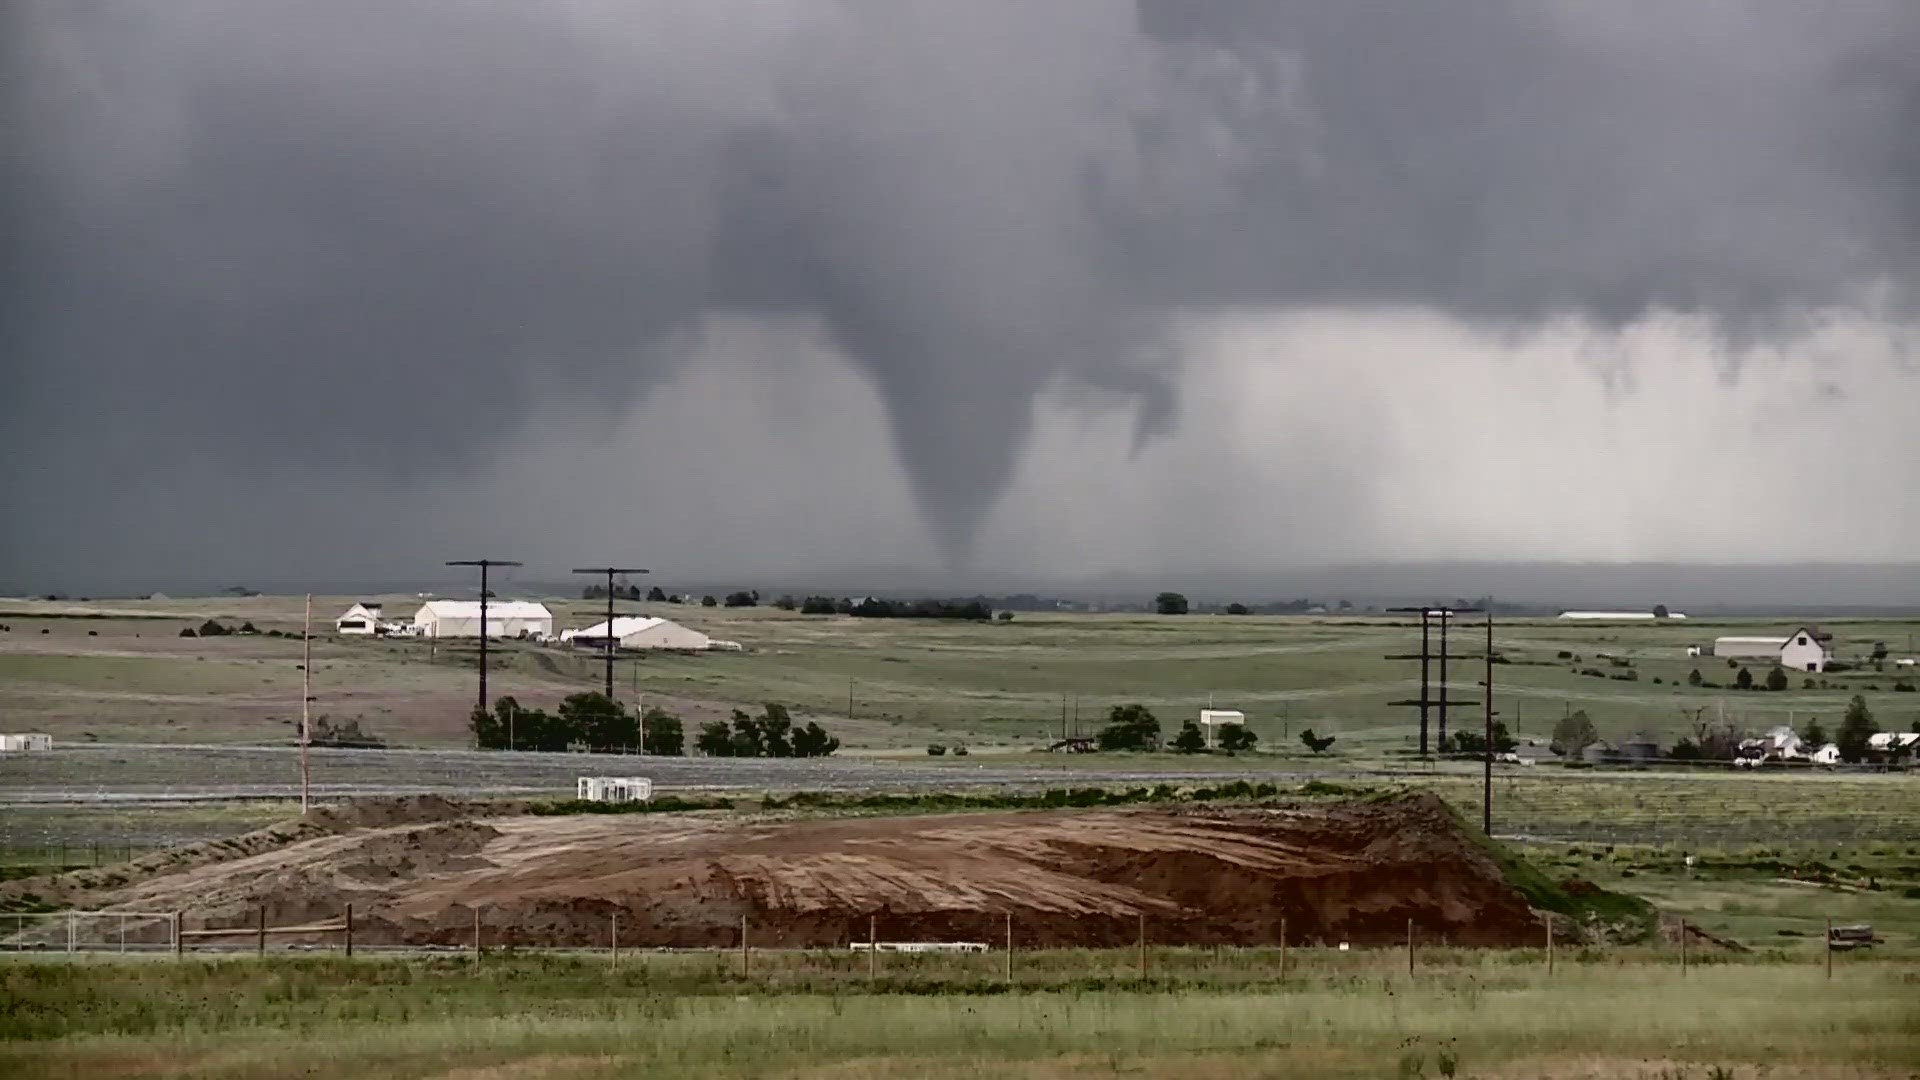 Geography makes the United States a hot spot for violent tornadoes.